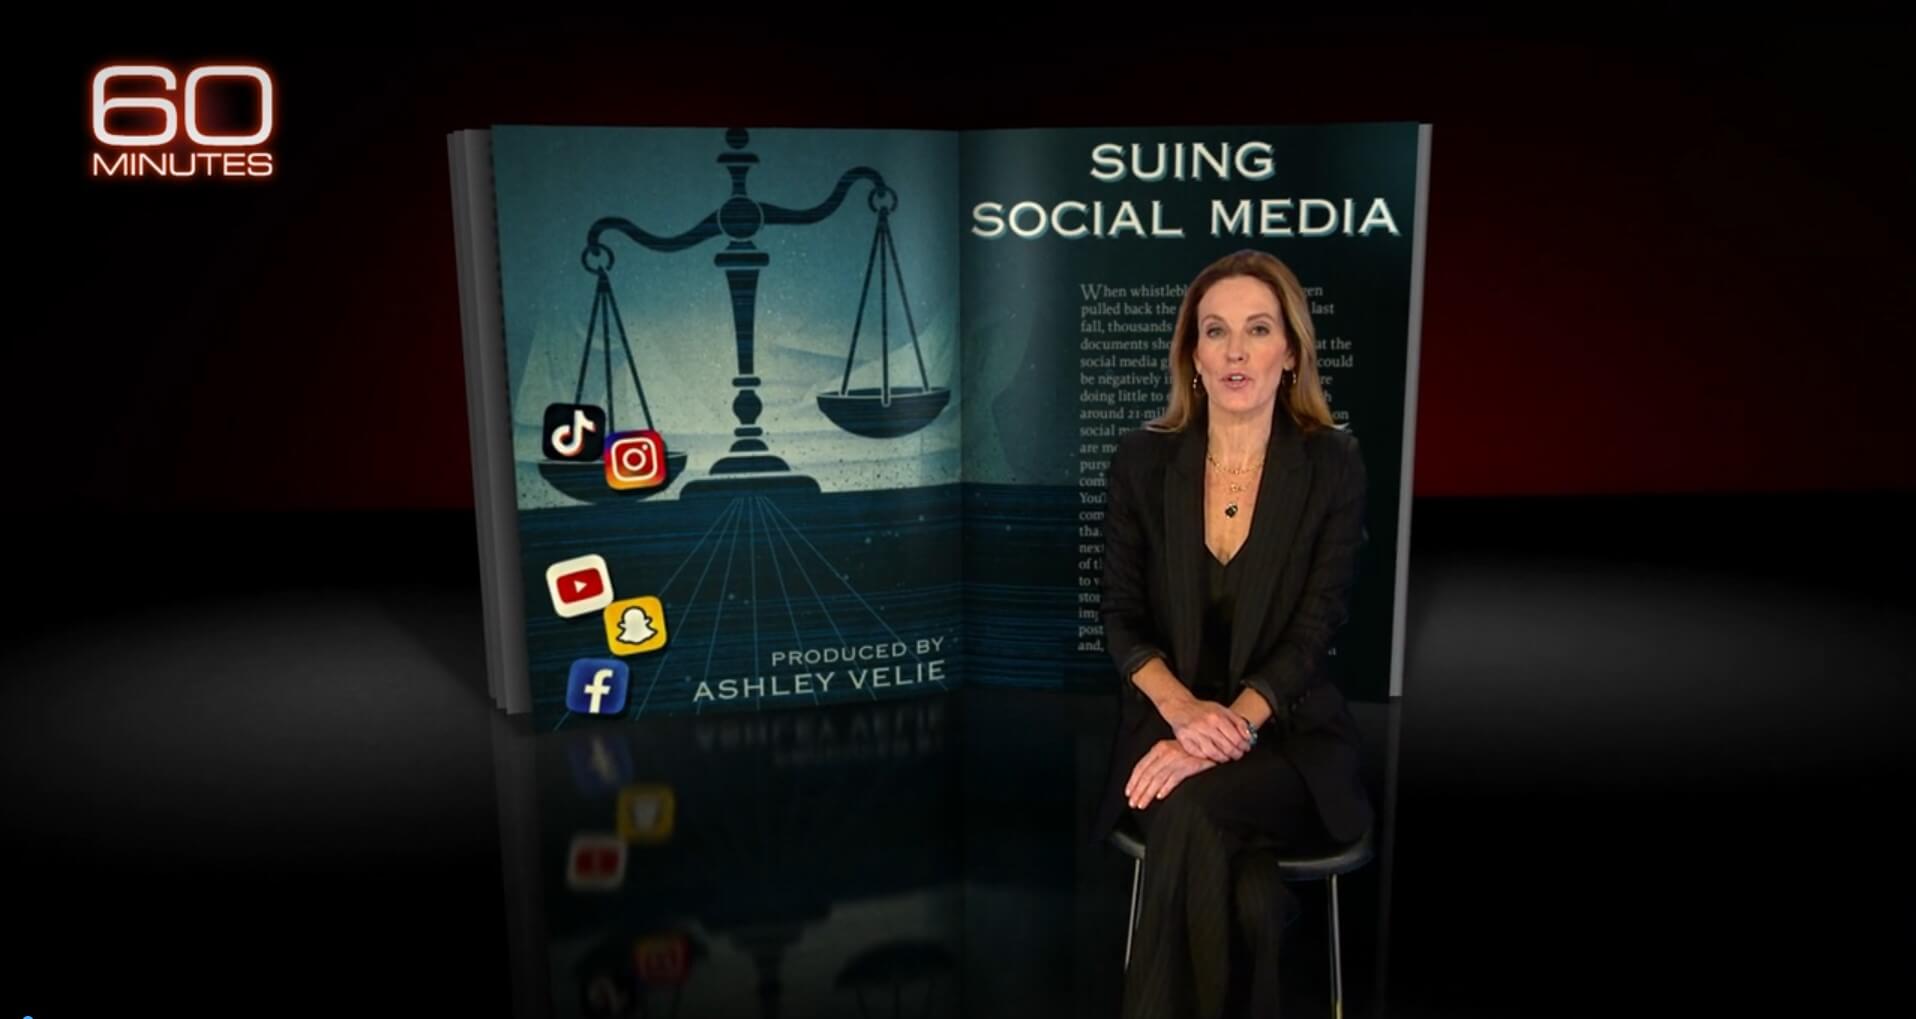 A screen catpure of the 60 Minute broadcast titled "Suing Social Media"